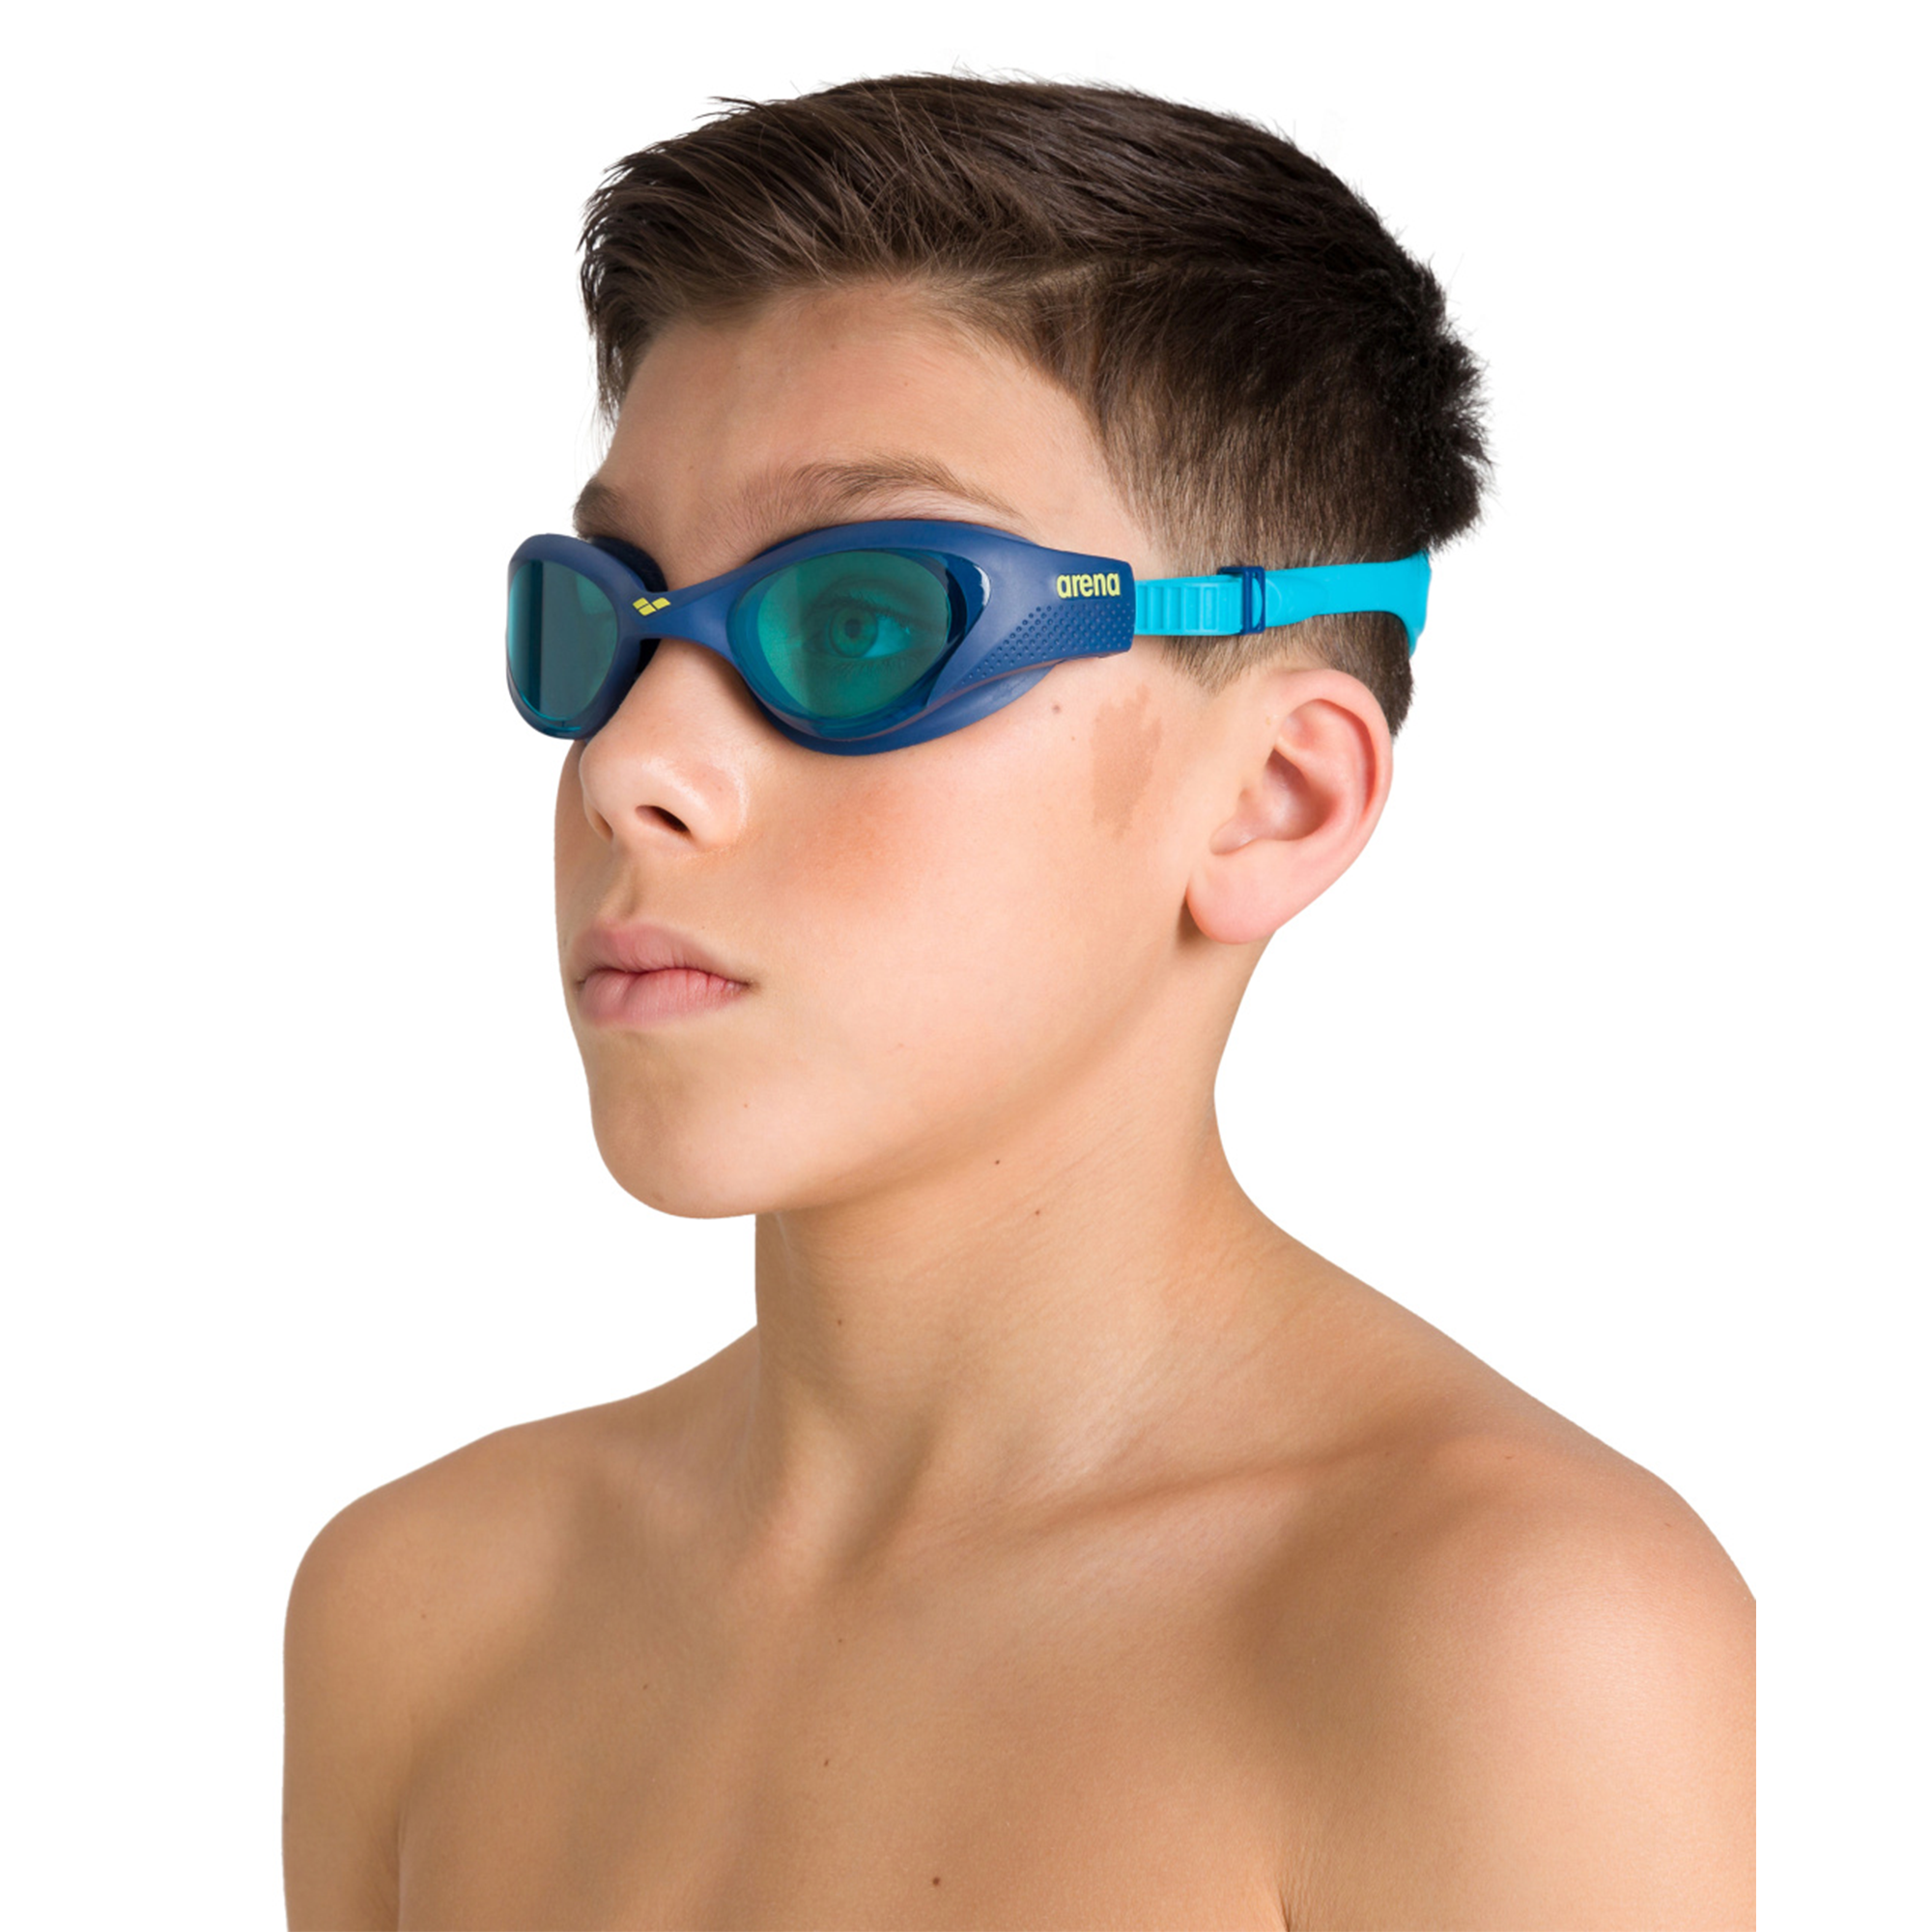 The One Junior Goggles